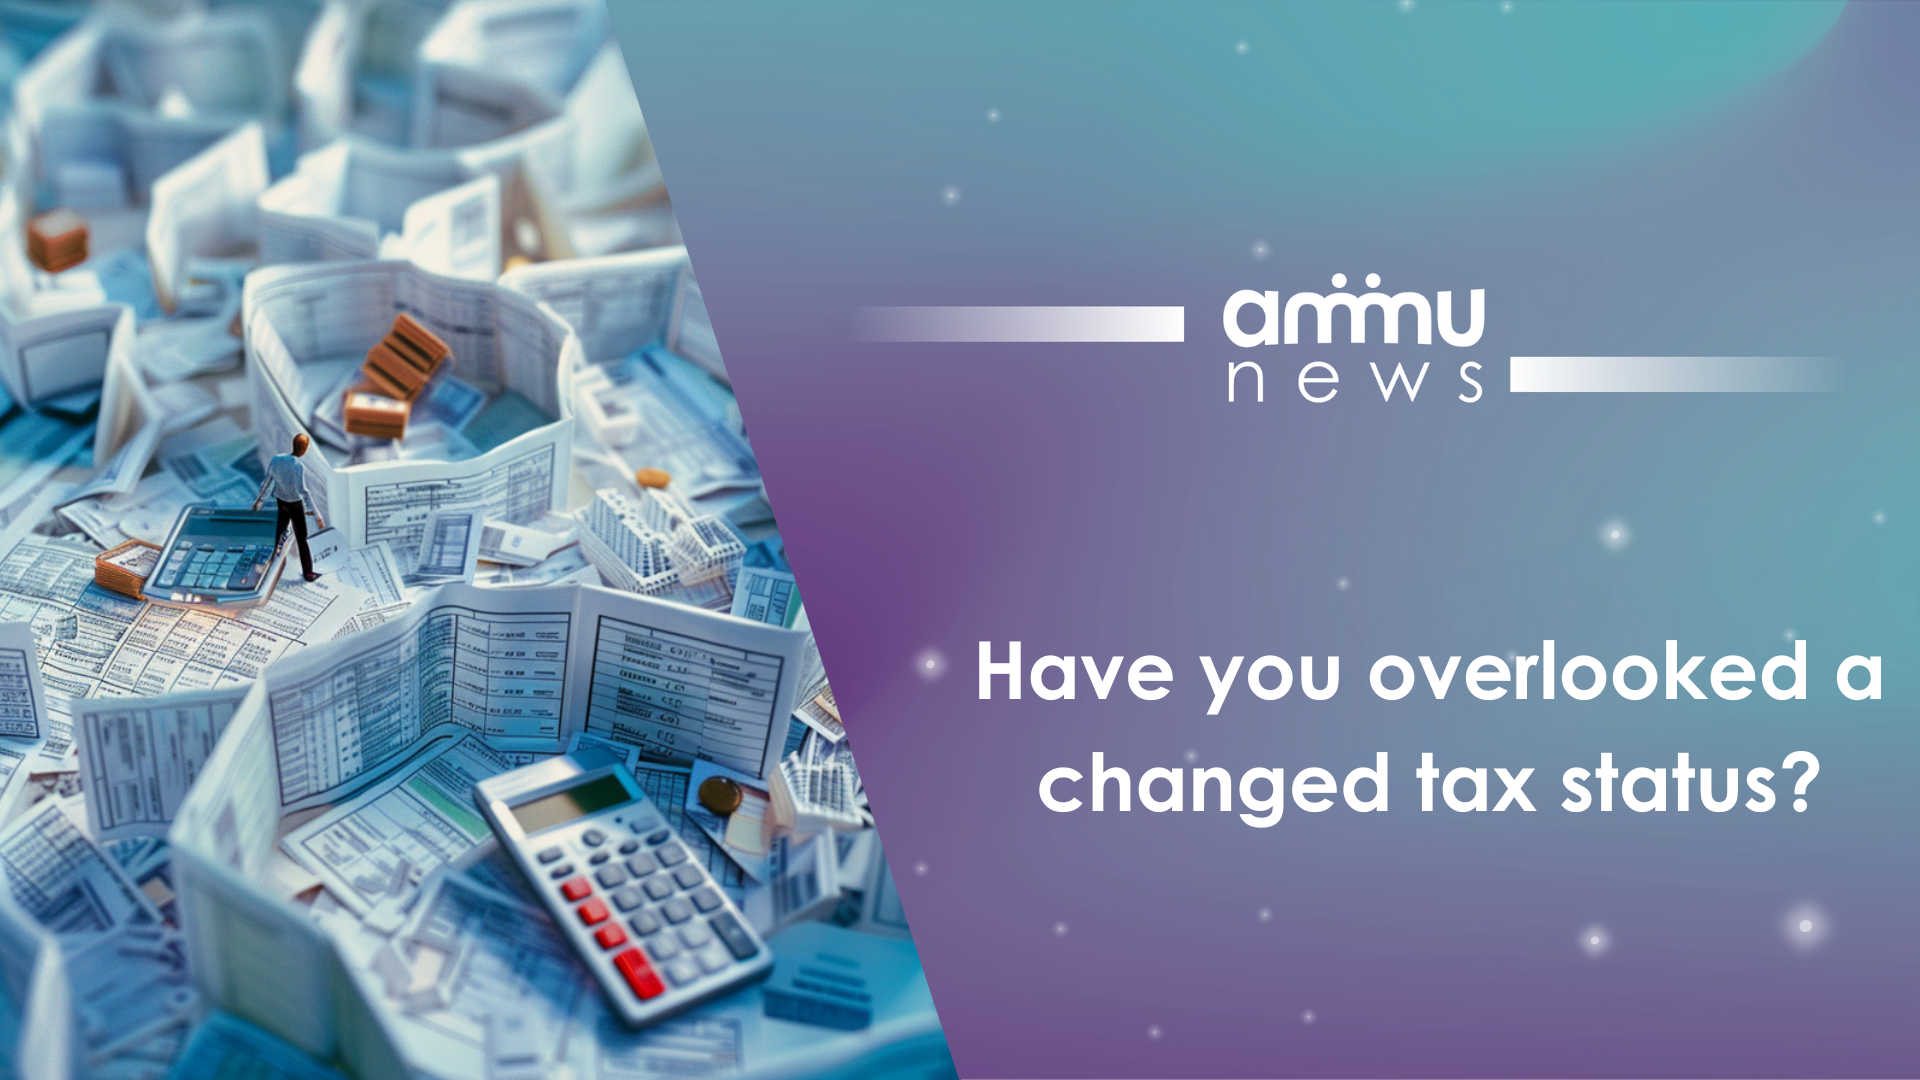 Have you overlooked a changed tax status?